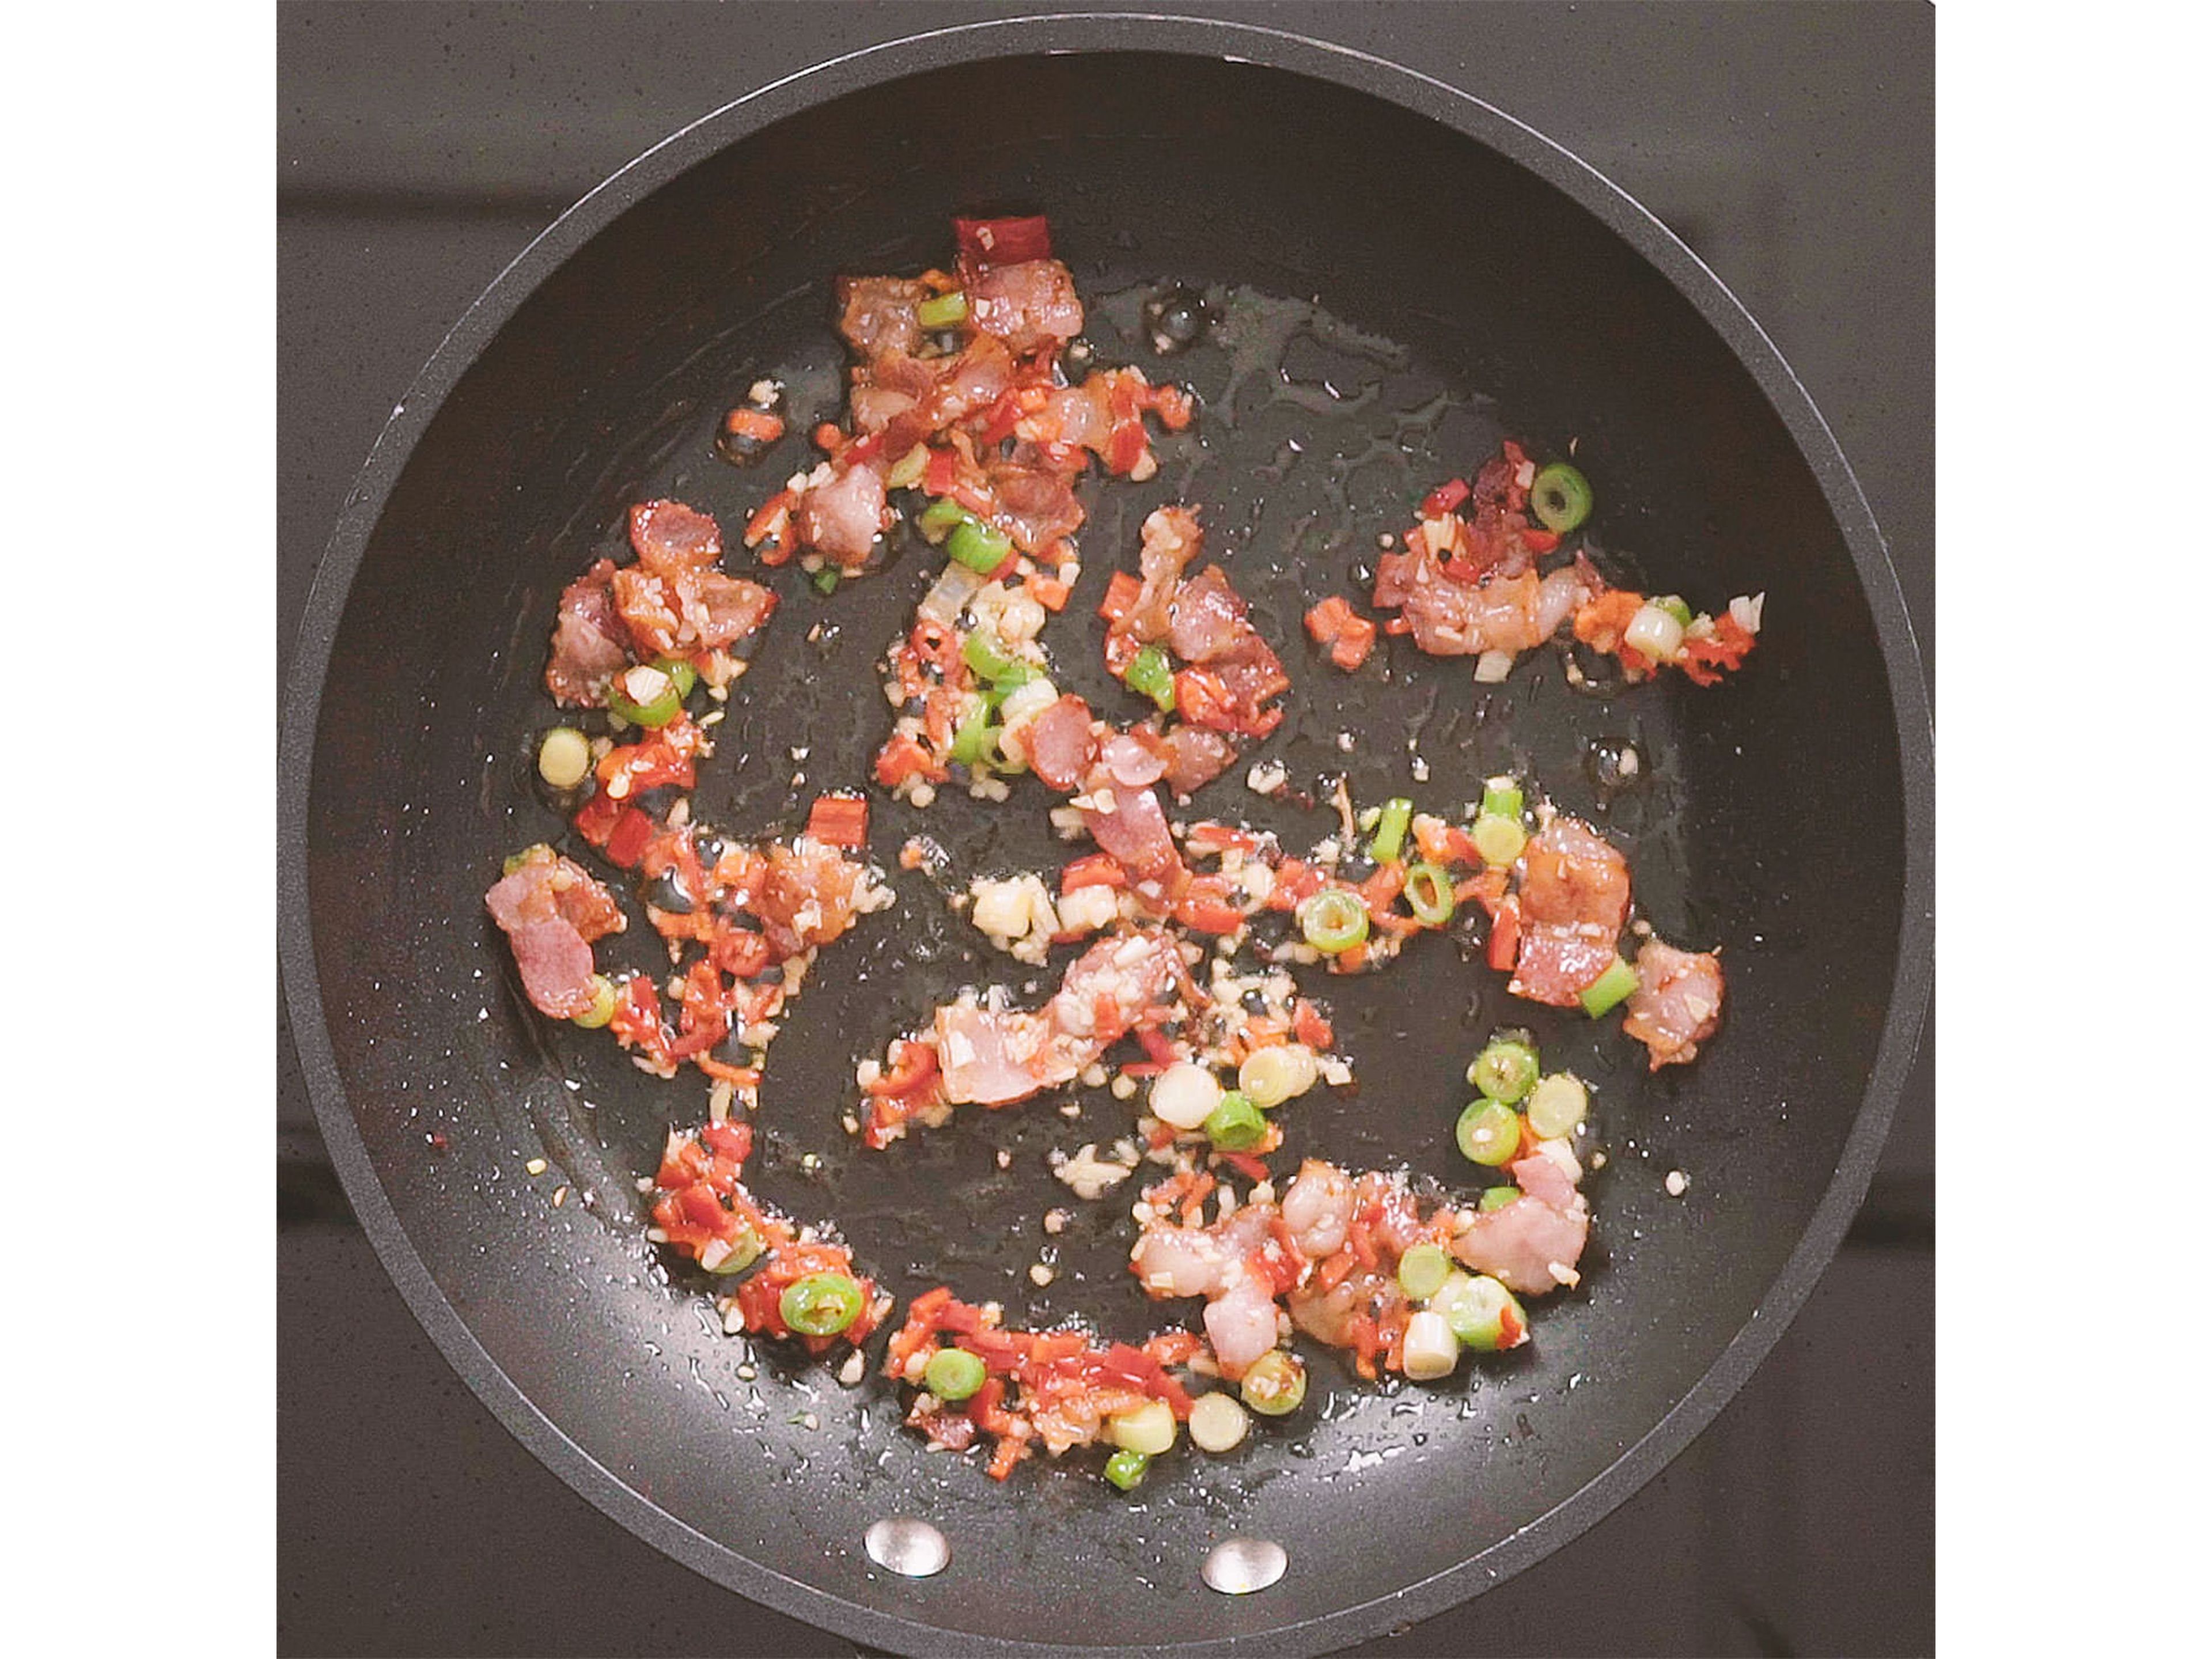 Add sesame oil, then add scallion whites, minced garlic, and chili to bacon and sauté for approx. 1 min. or until fragrant.